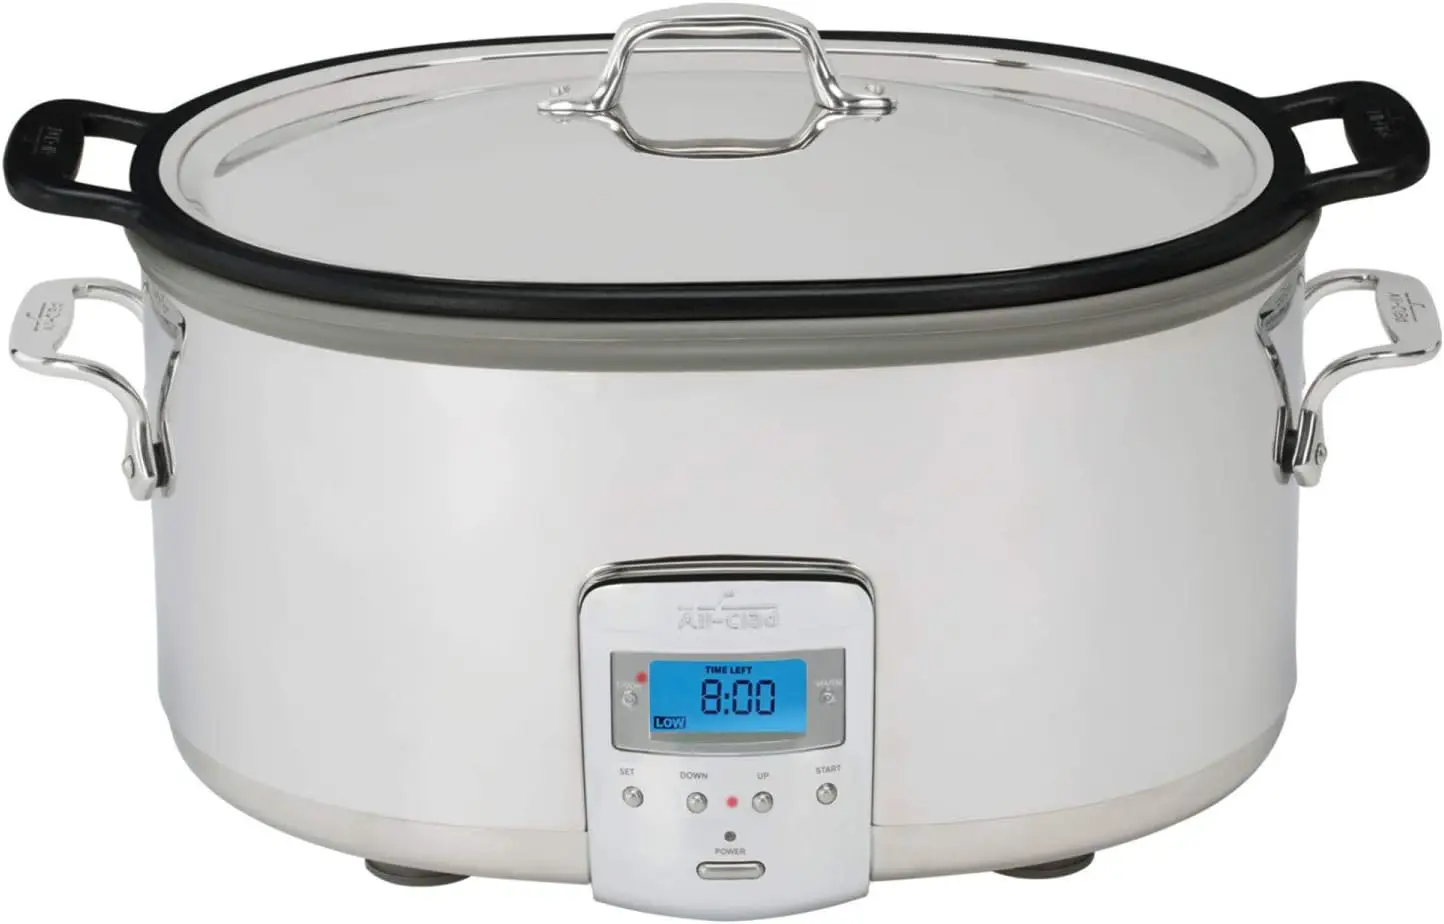 

All-Clad Stainless Steel Electric Slow Cooker 7 Quart, Aluminum Insert, Programmable LCD Screen Digital Timer, SD700350, Silver